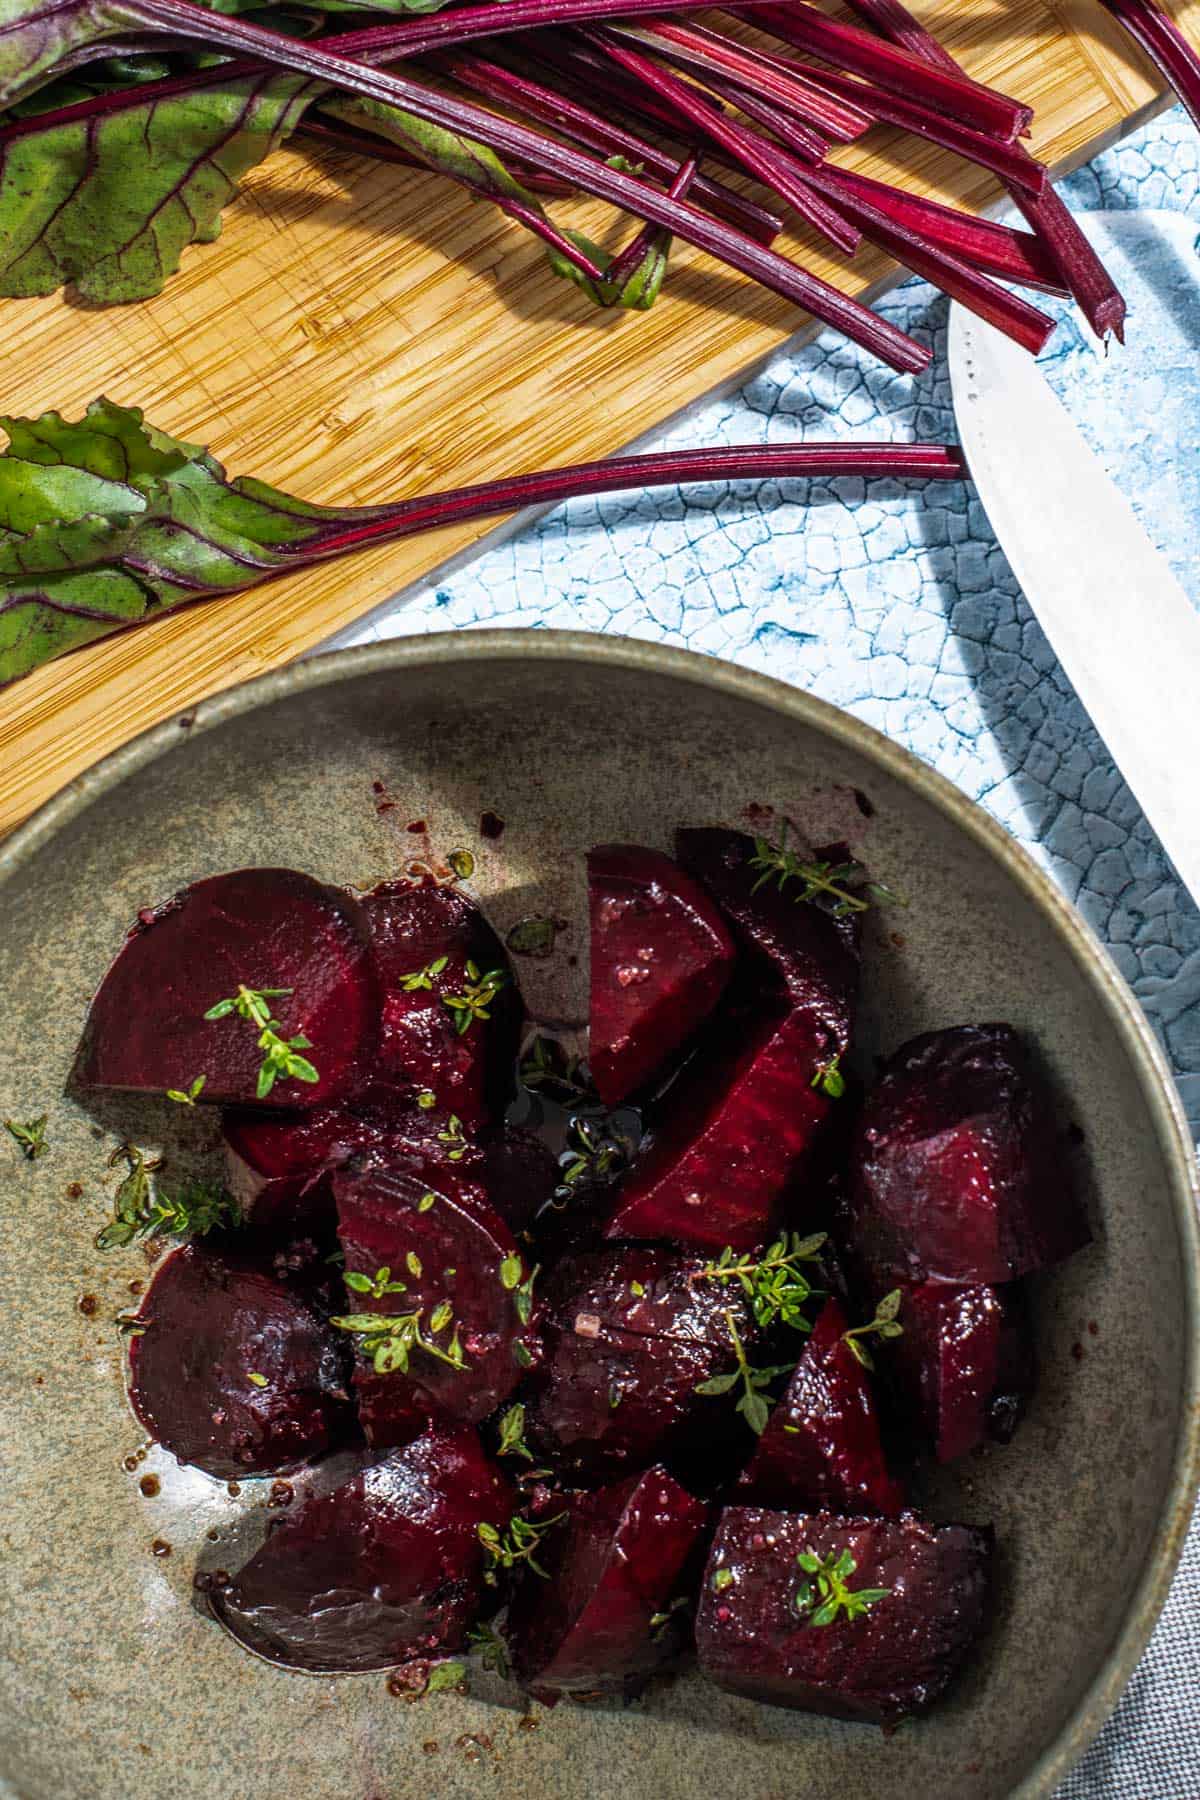 A bowl of diced beets alongside fresh beet greens on a wooden board.